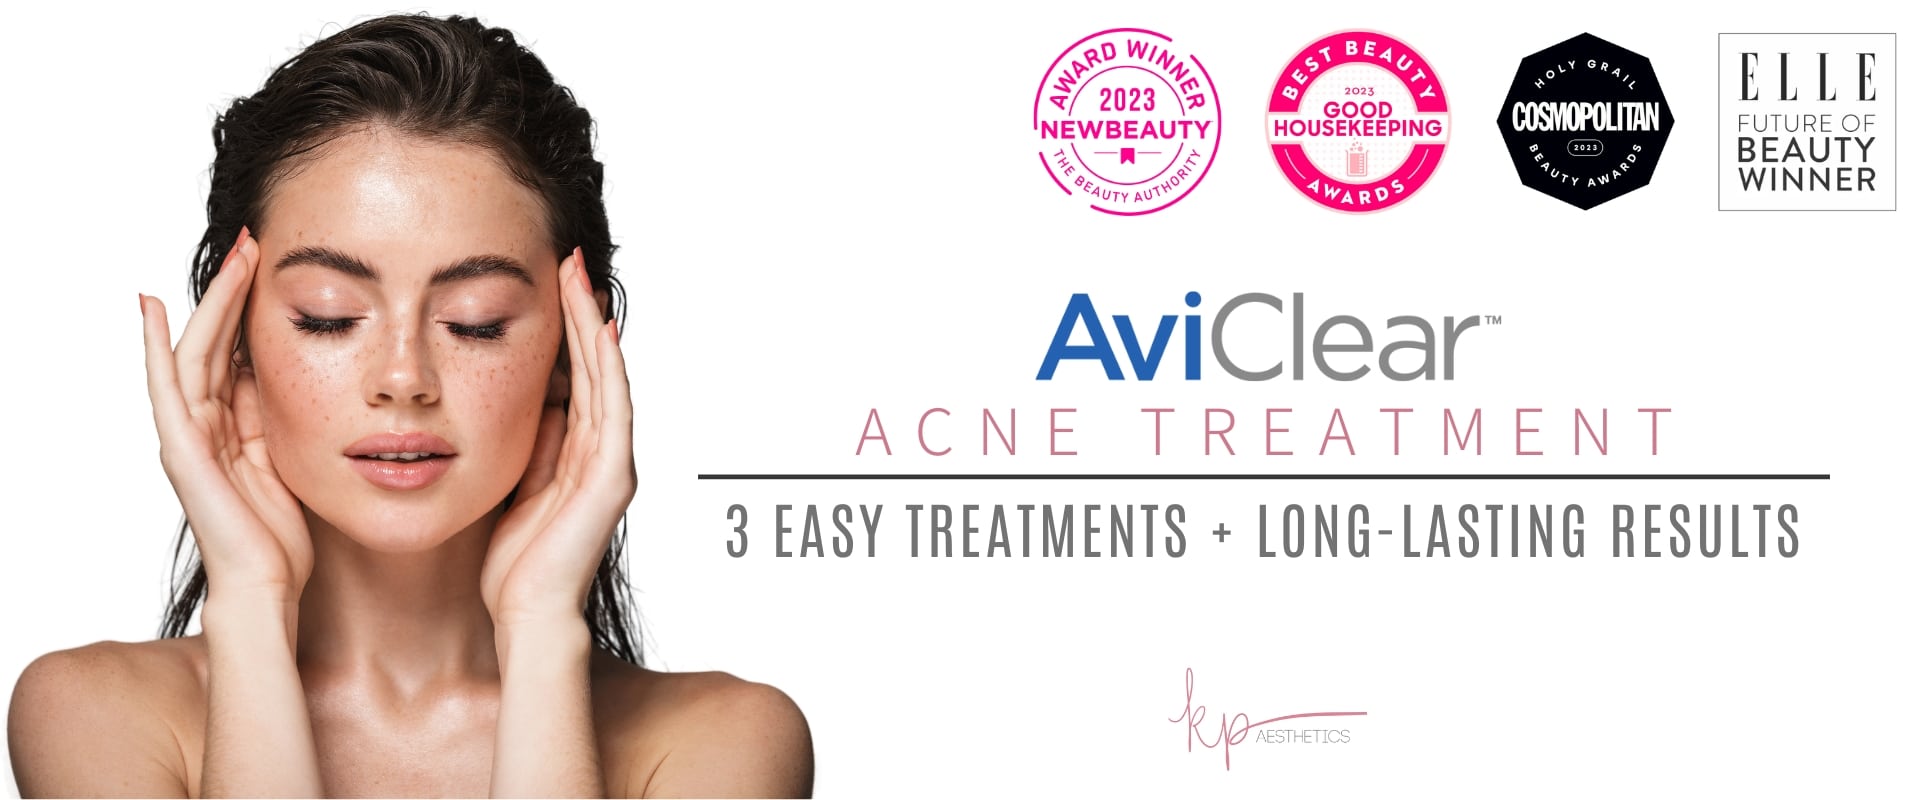 A brunette lady advertising AviClear, an acne treatment available at KP Aesthetics in Newtown Square, Pennsylvania